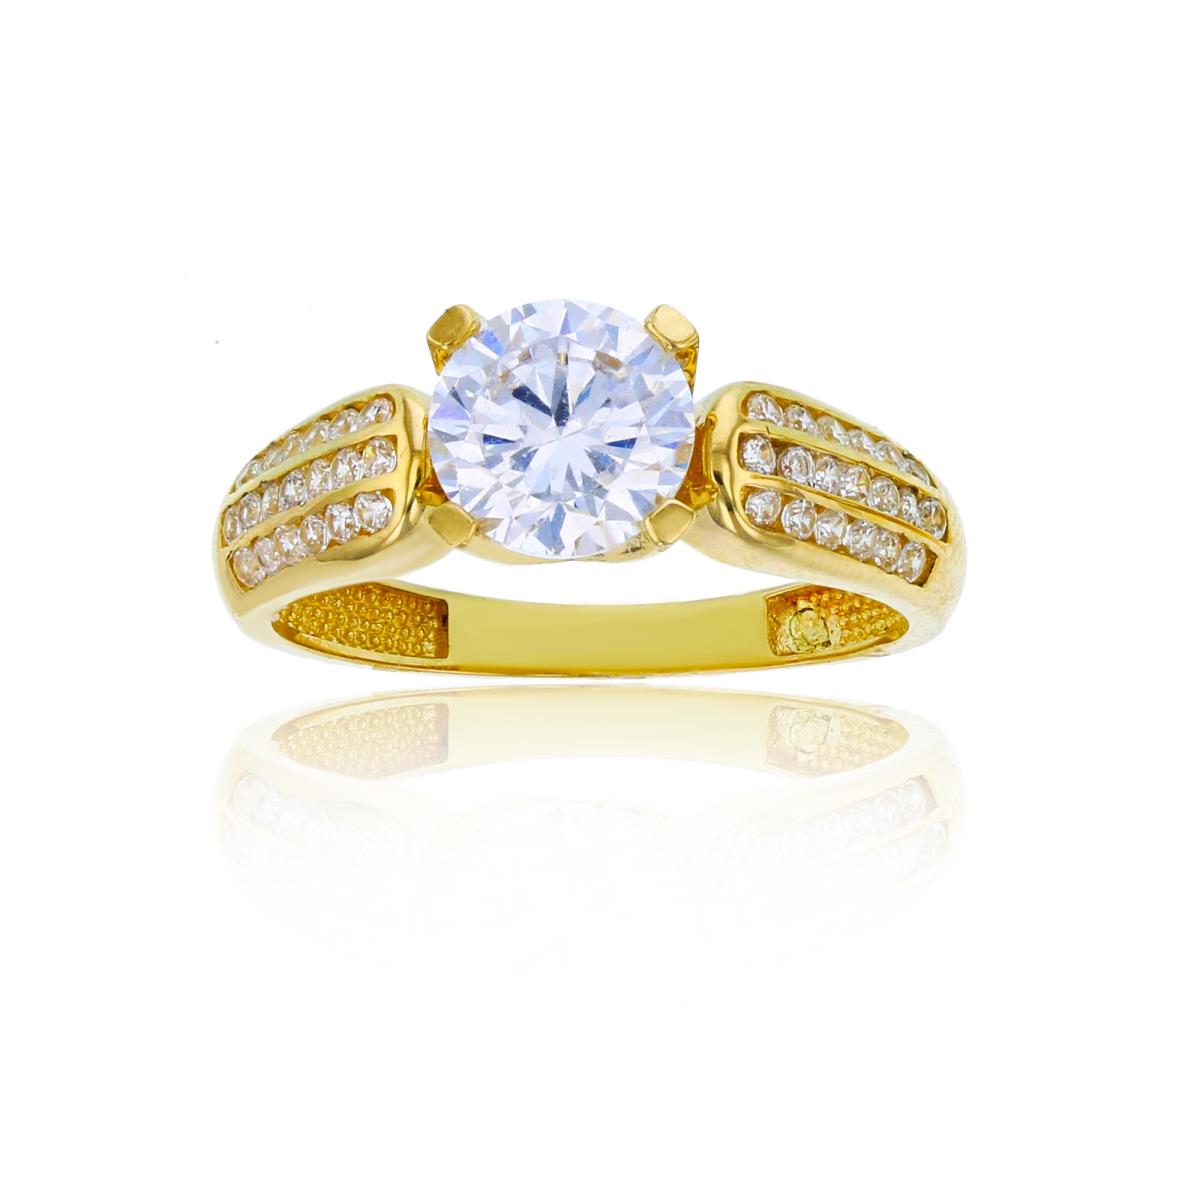 14K Yellow Gold 7mm Round Cut CZ 3-Row Pave Sides Engagement Ring